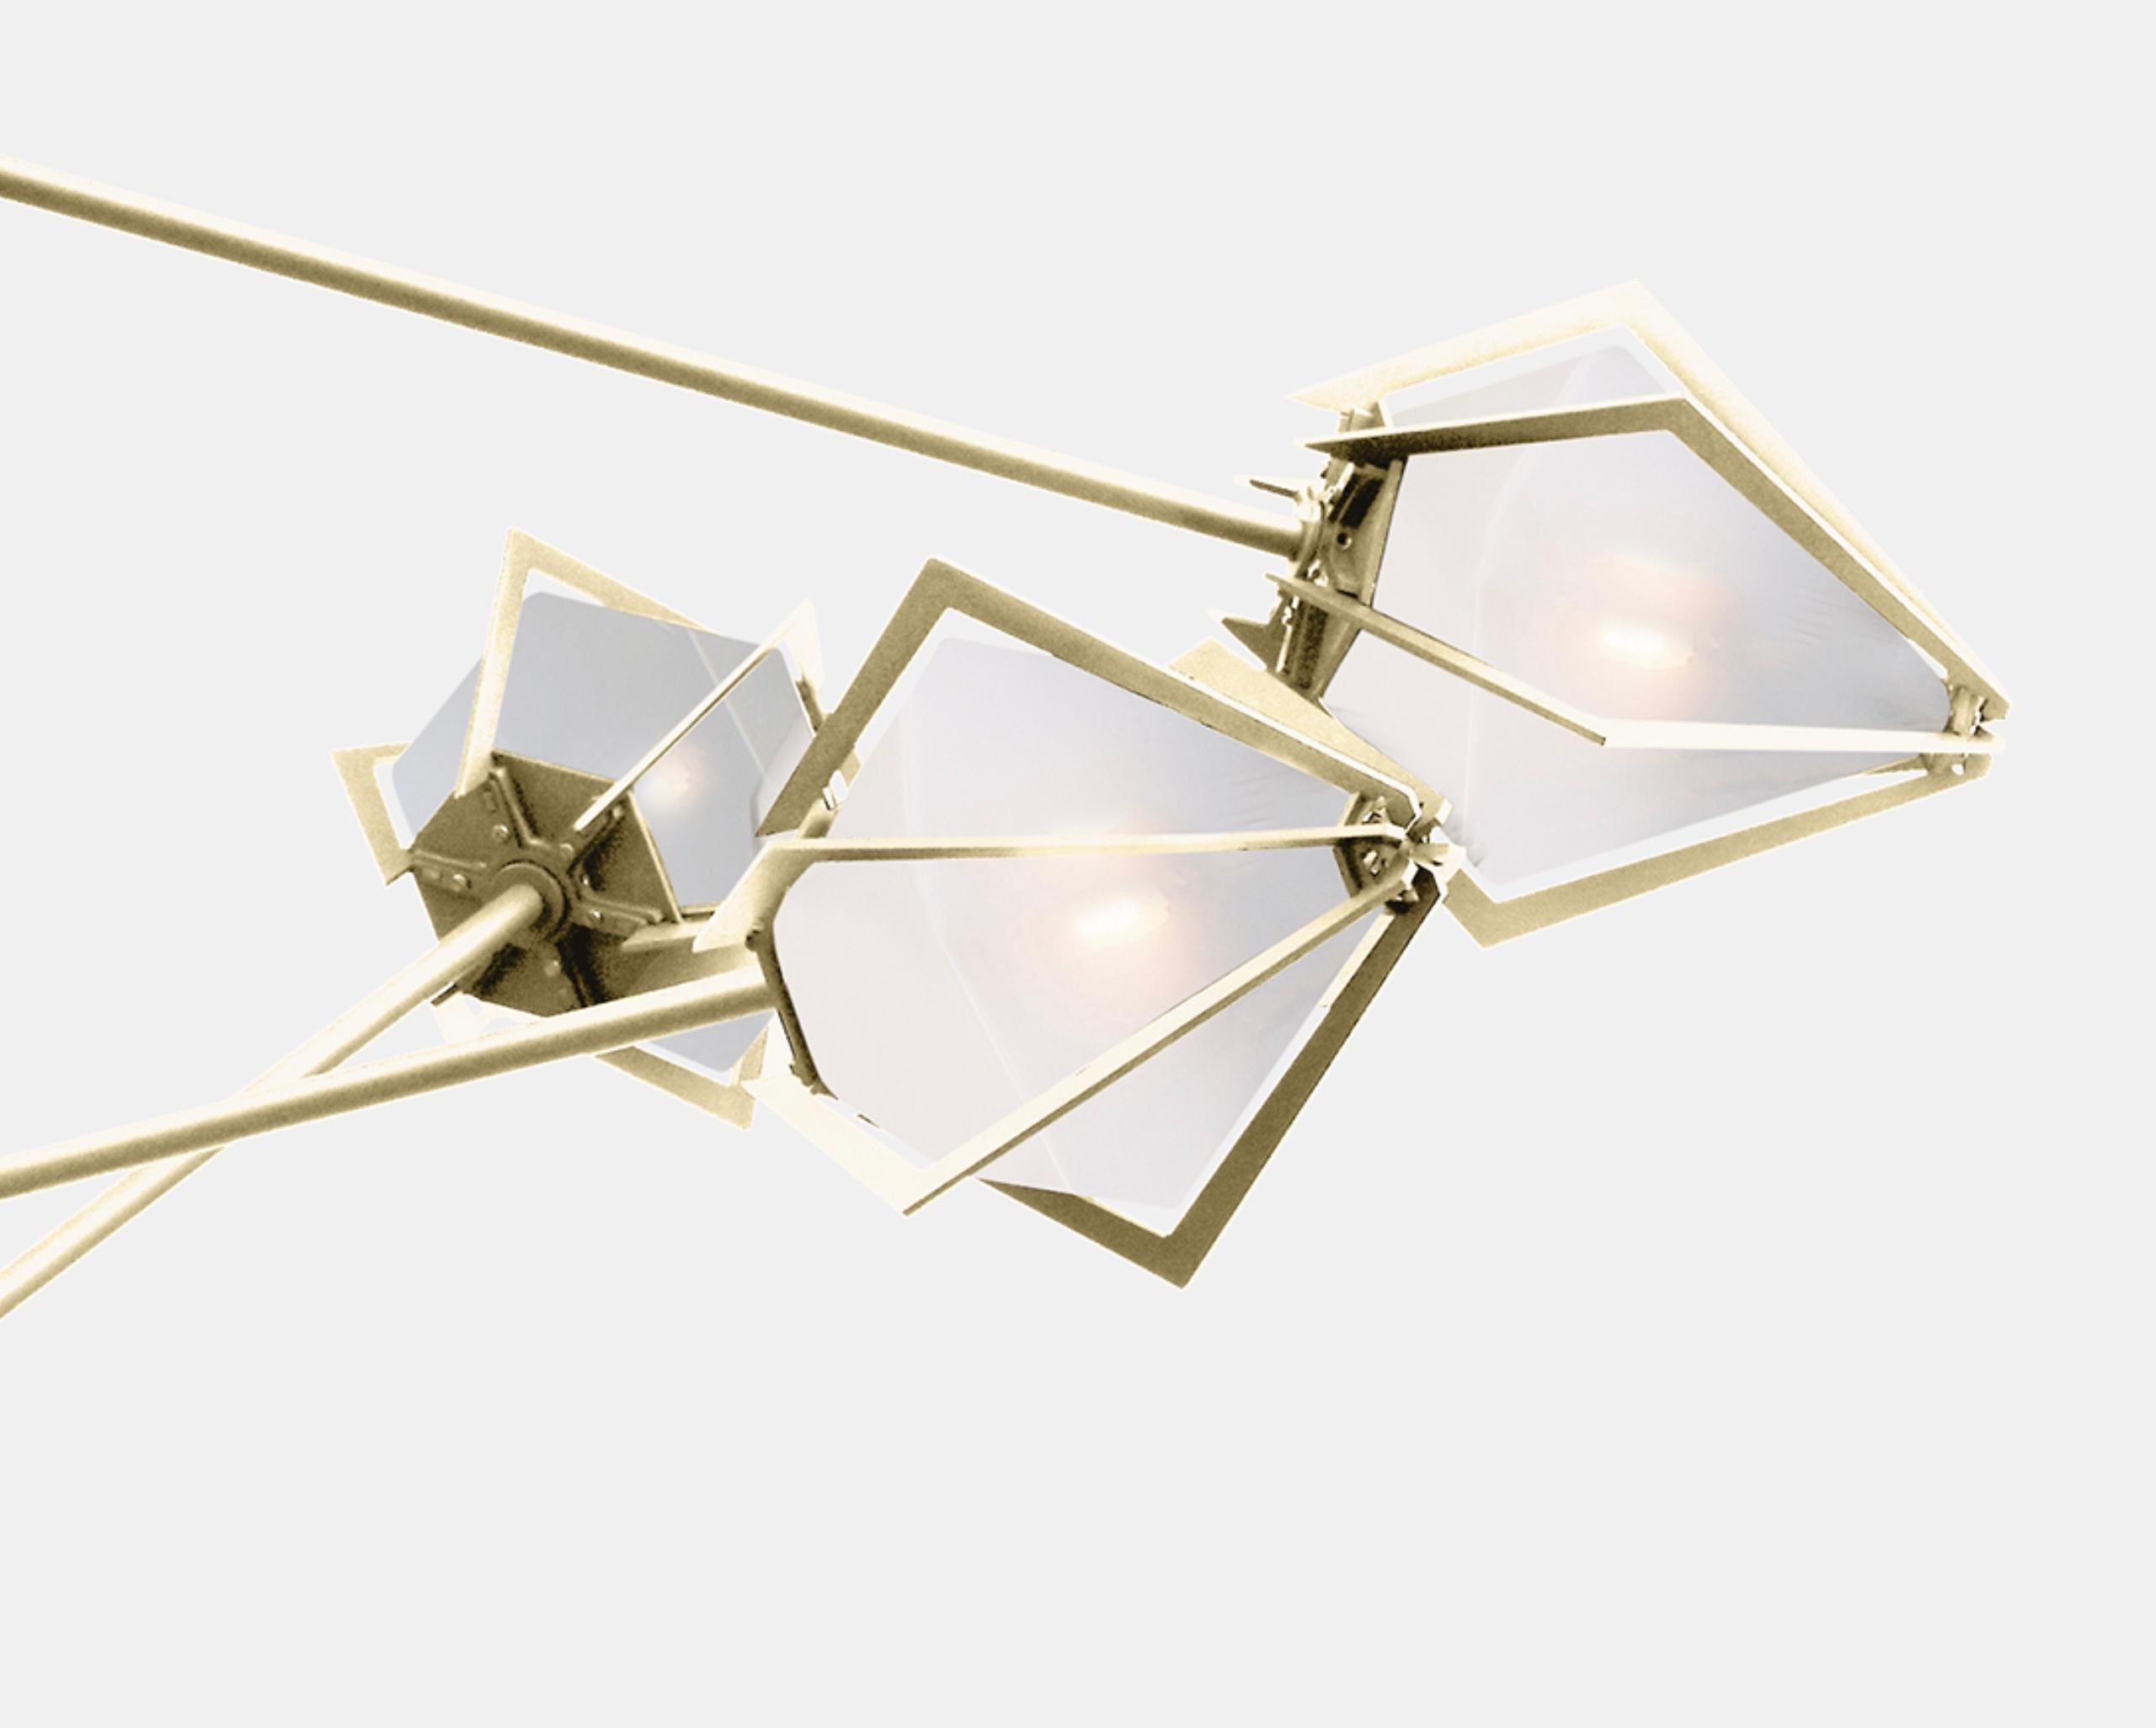 The Harlow Spoke Chandelier Small offers an elegant starburst of light that reflects and refracts through its mold-blown glass shade. A sparkling prism, the Harlow Spoke Chandelier Small is directly inspired by the world of jewelry with its metallic